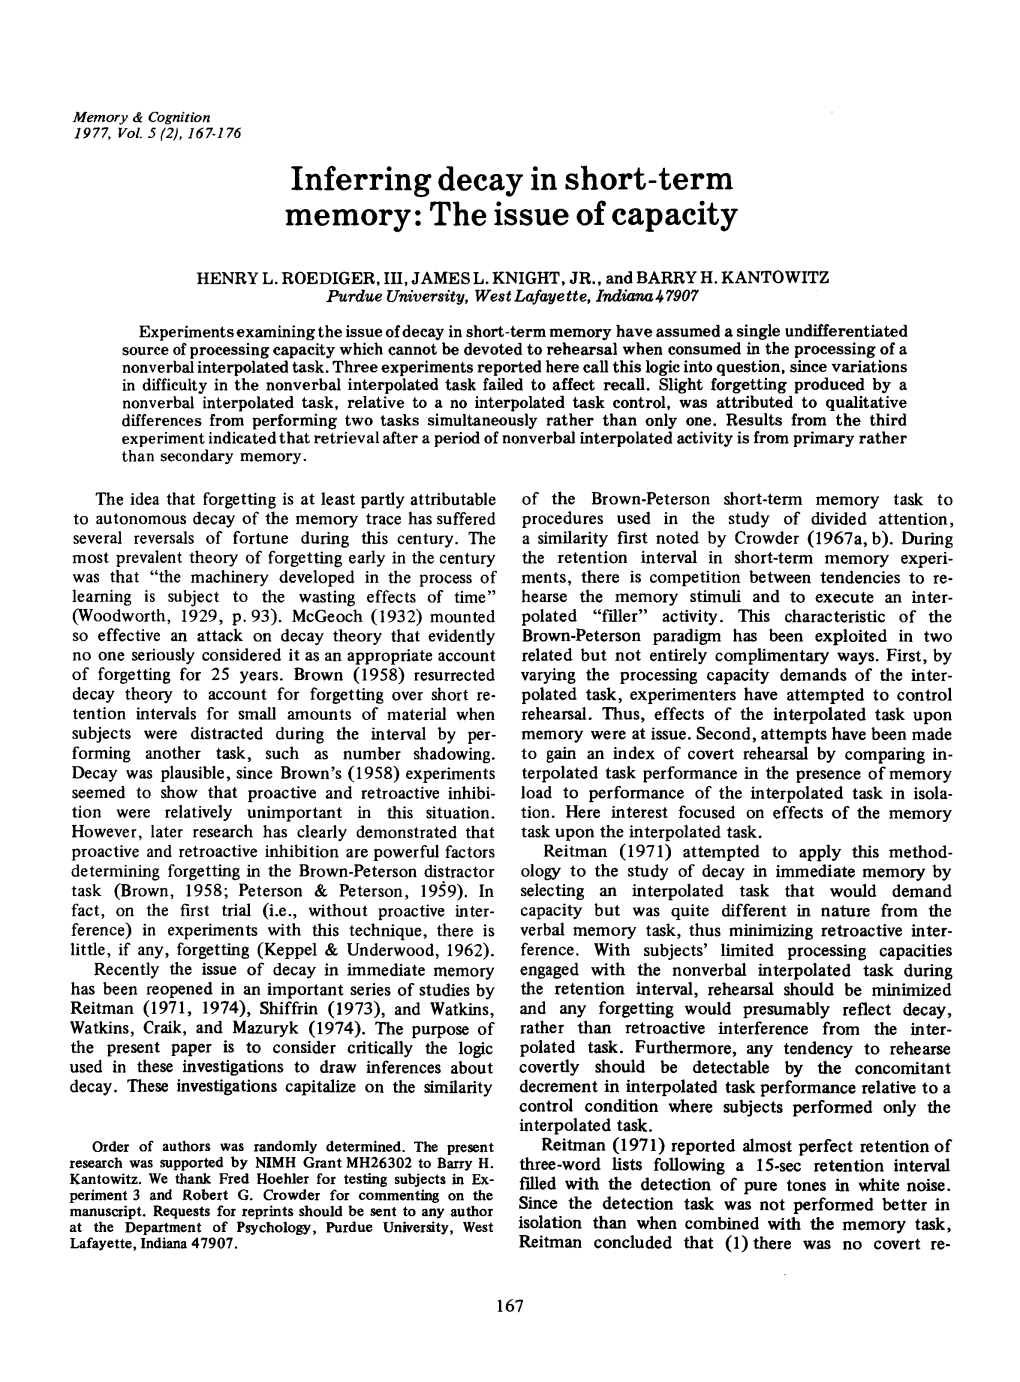 Inferring Decay in Short-Term Memory: the Issue of Capacity